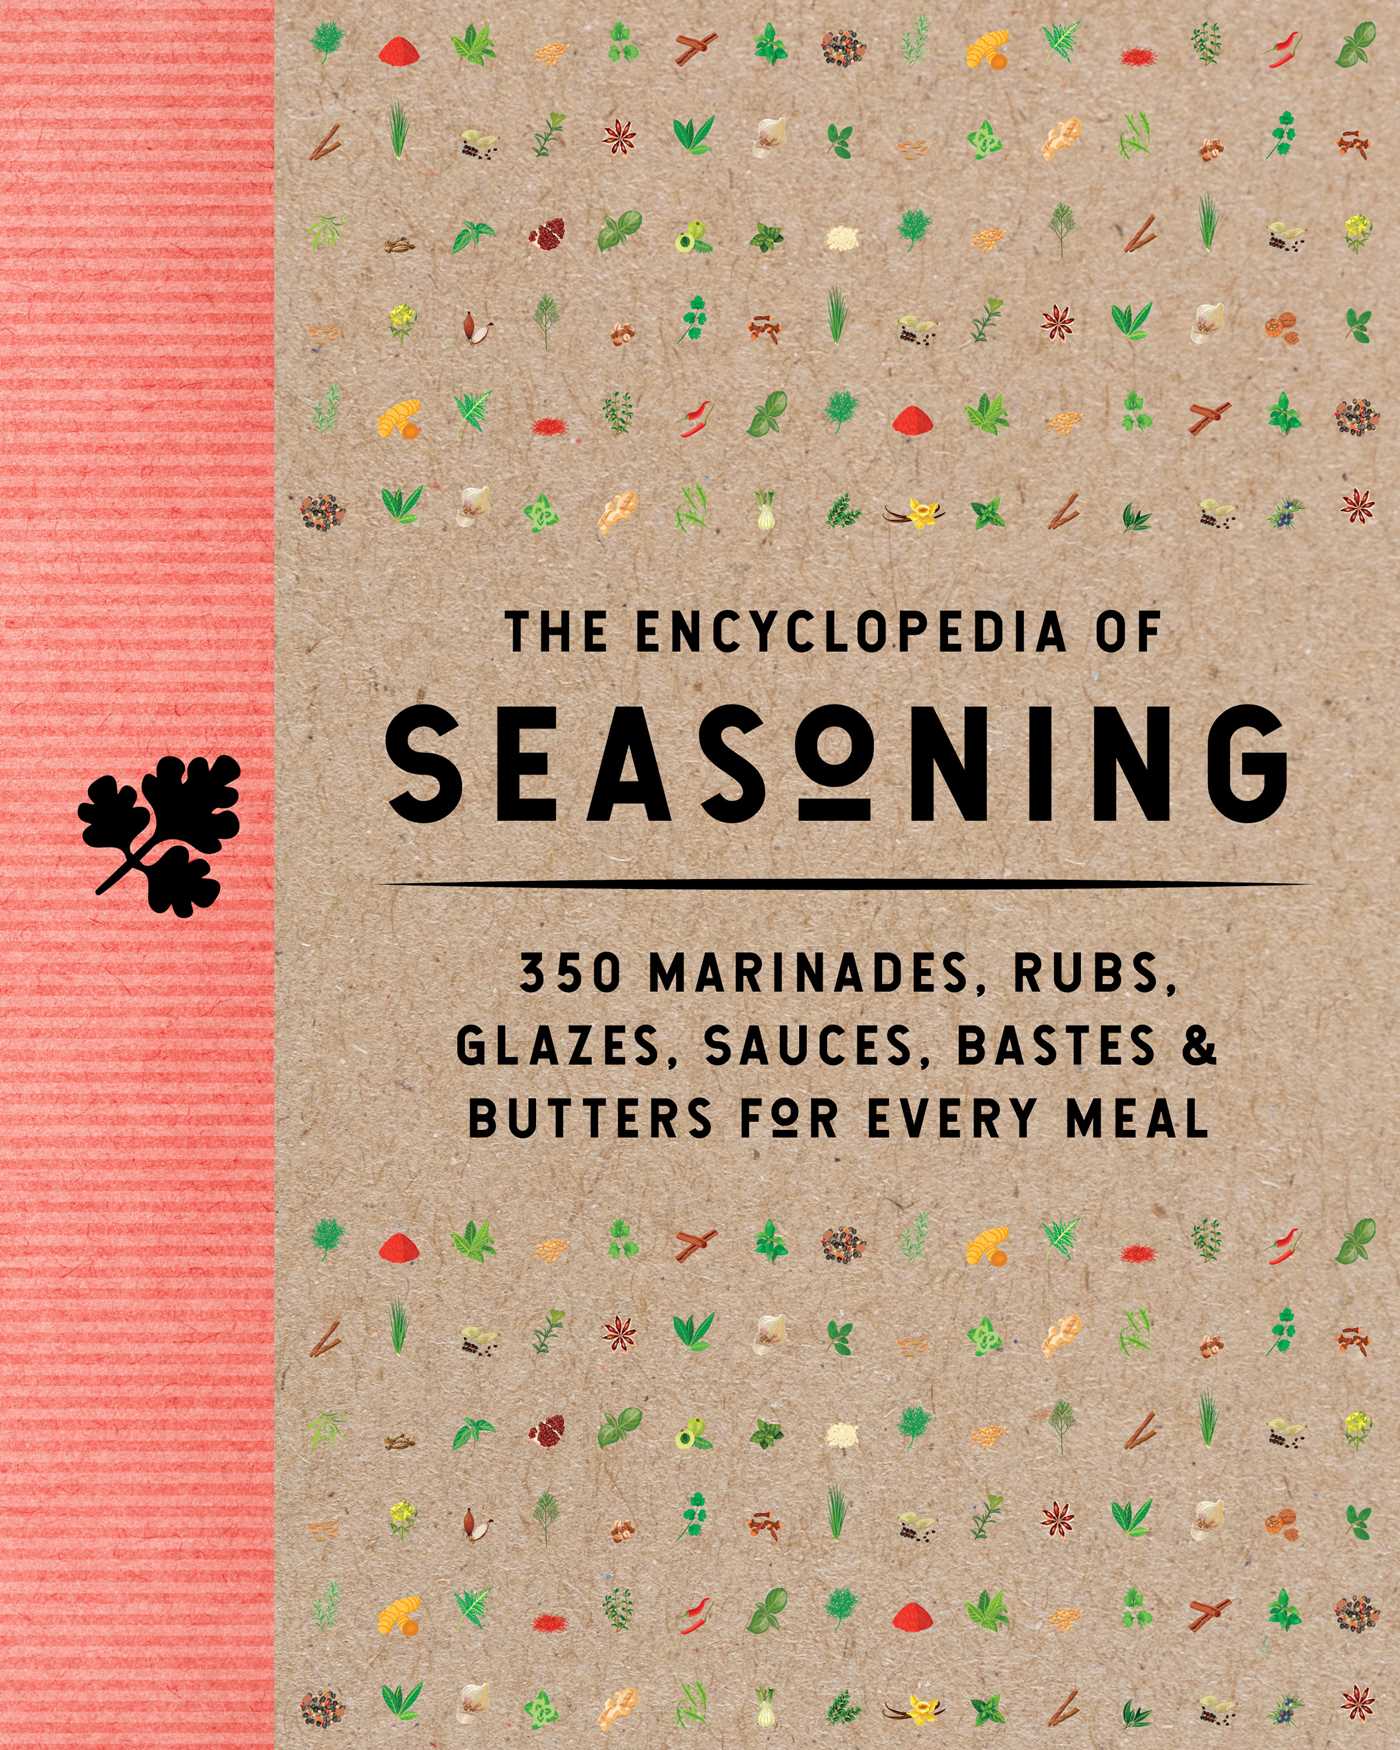 The Encyclopedia of Seasoning: 350 Marinades, Rubs, Glazes, Sauces, Bastes & Butters for Every Meal